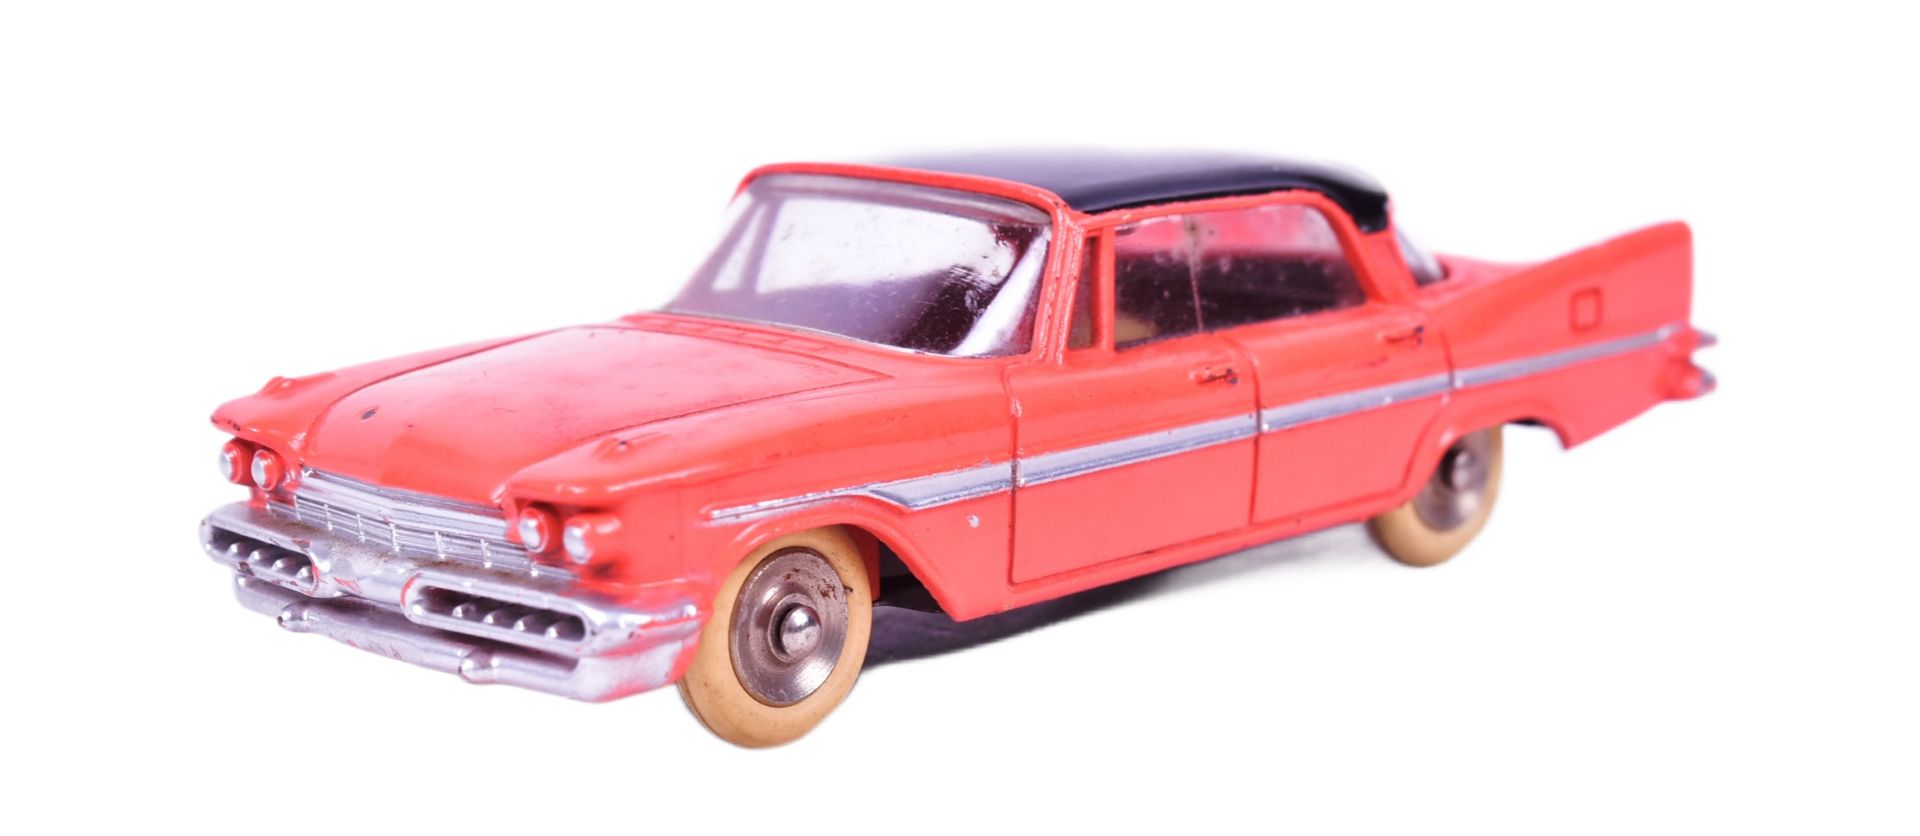 DIECAST - FRENCH DINKY TOYS - DESOTO 59 DIPLOMAT